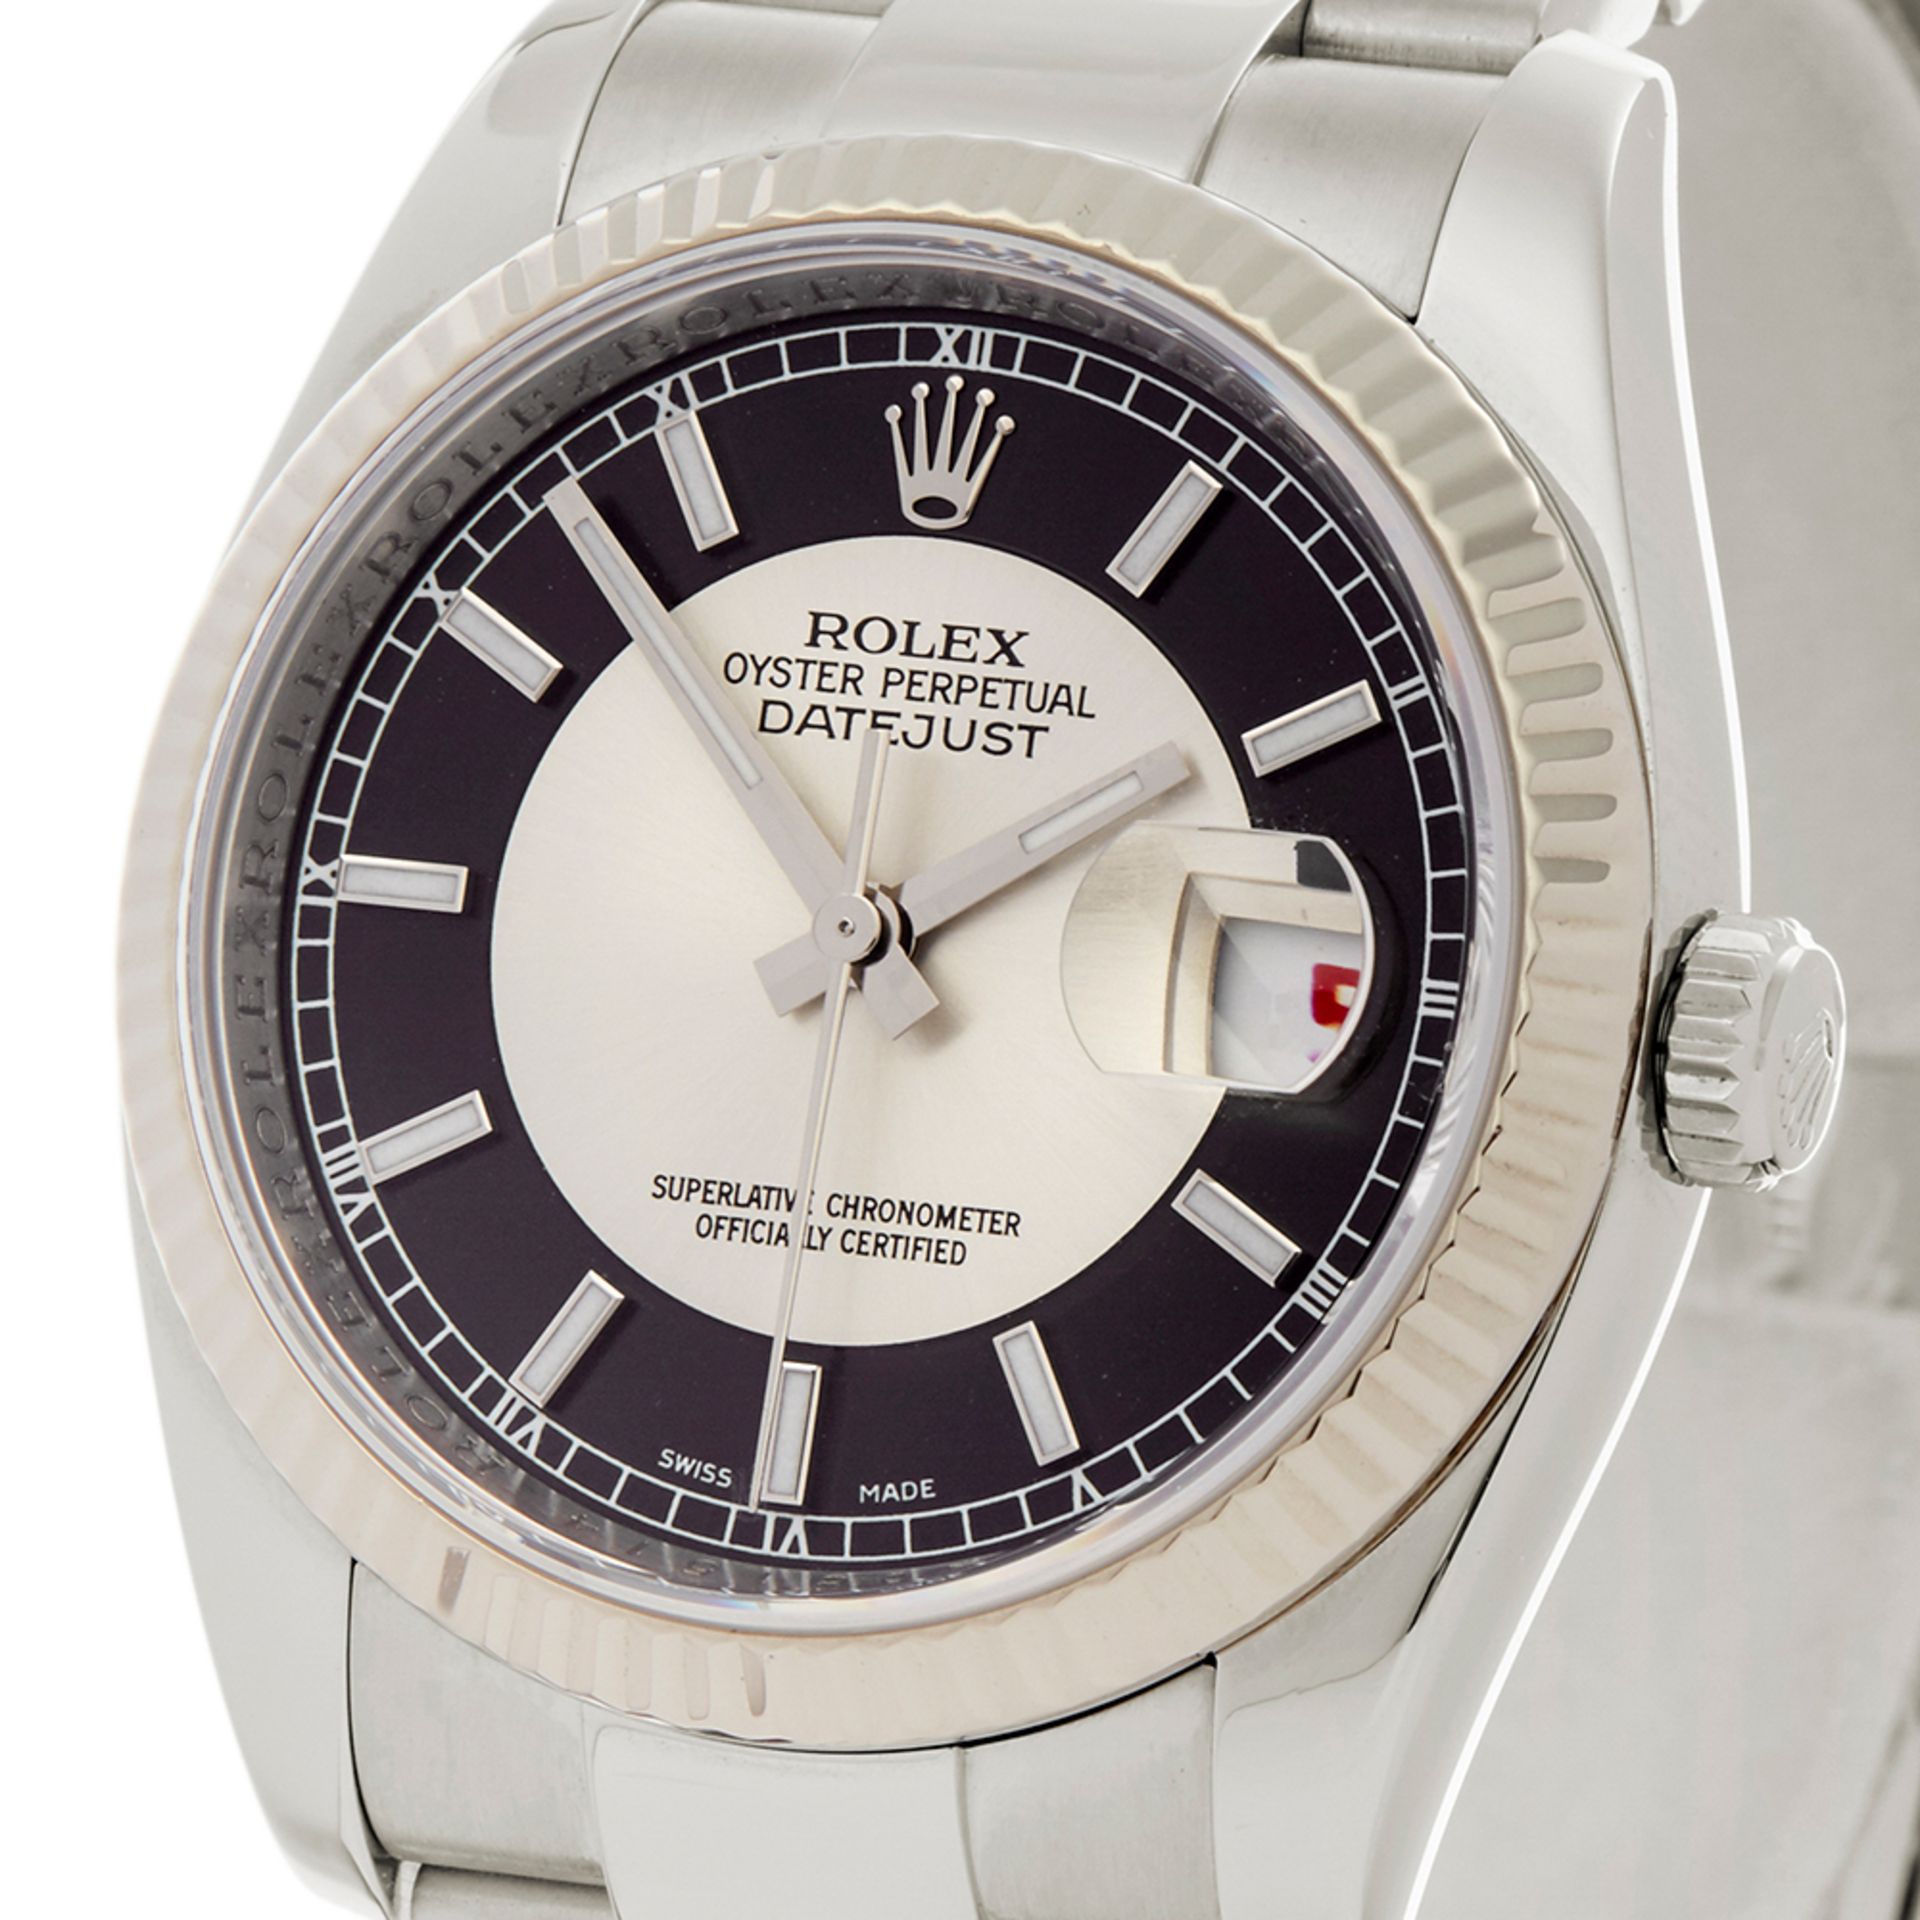 Rolex Datejust 36mm Stainless Steel - 116234 - Image 3 of 7